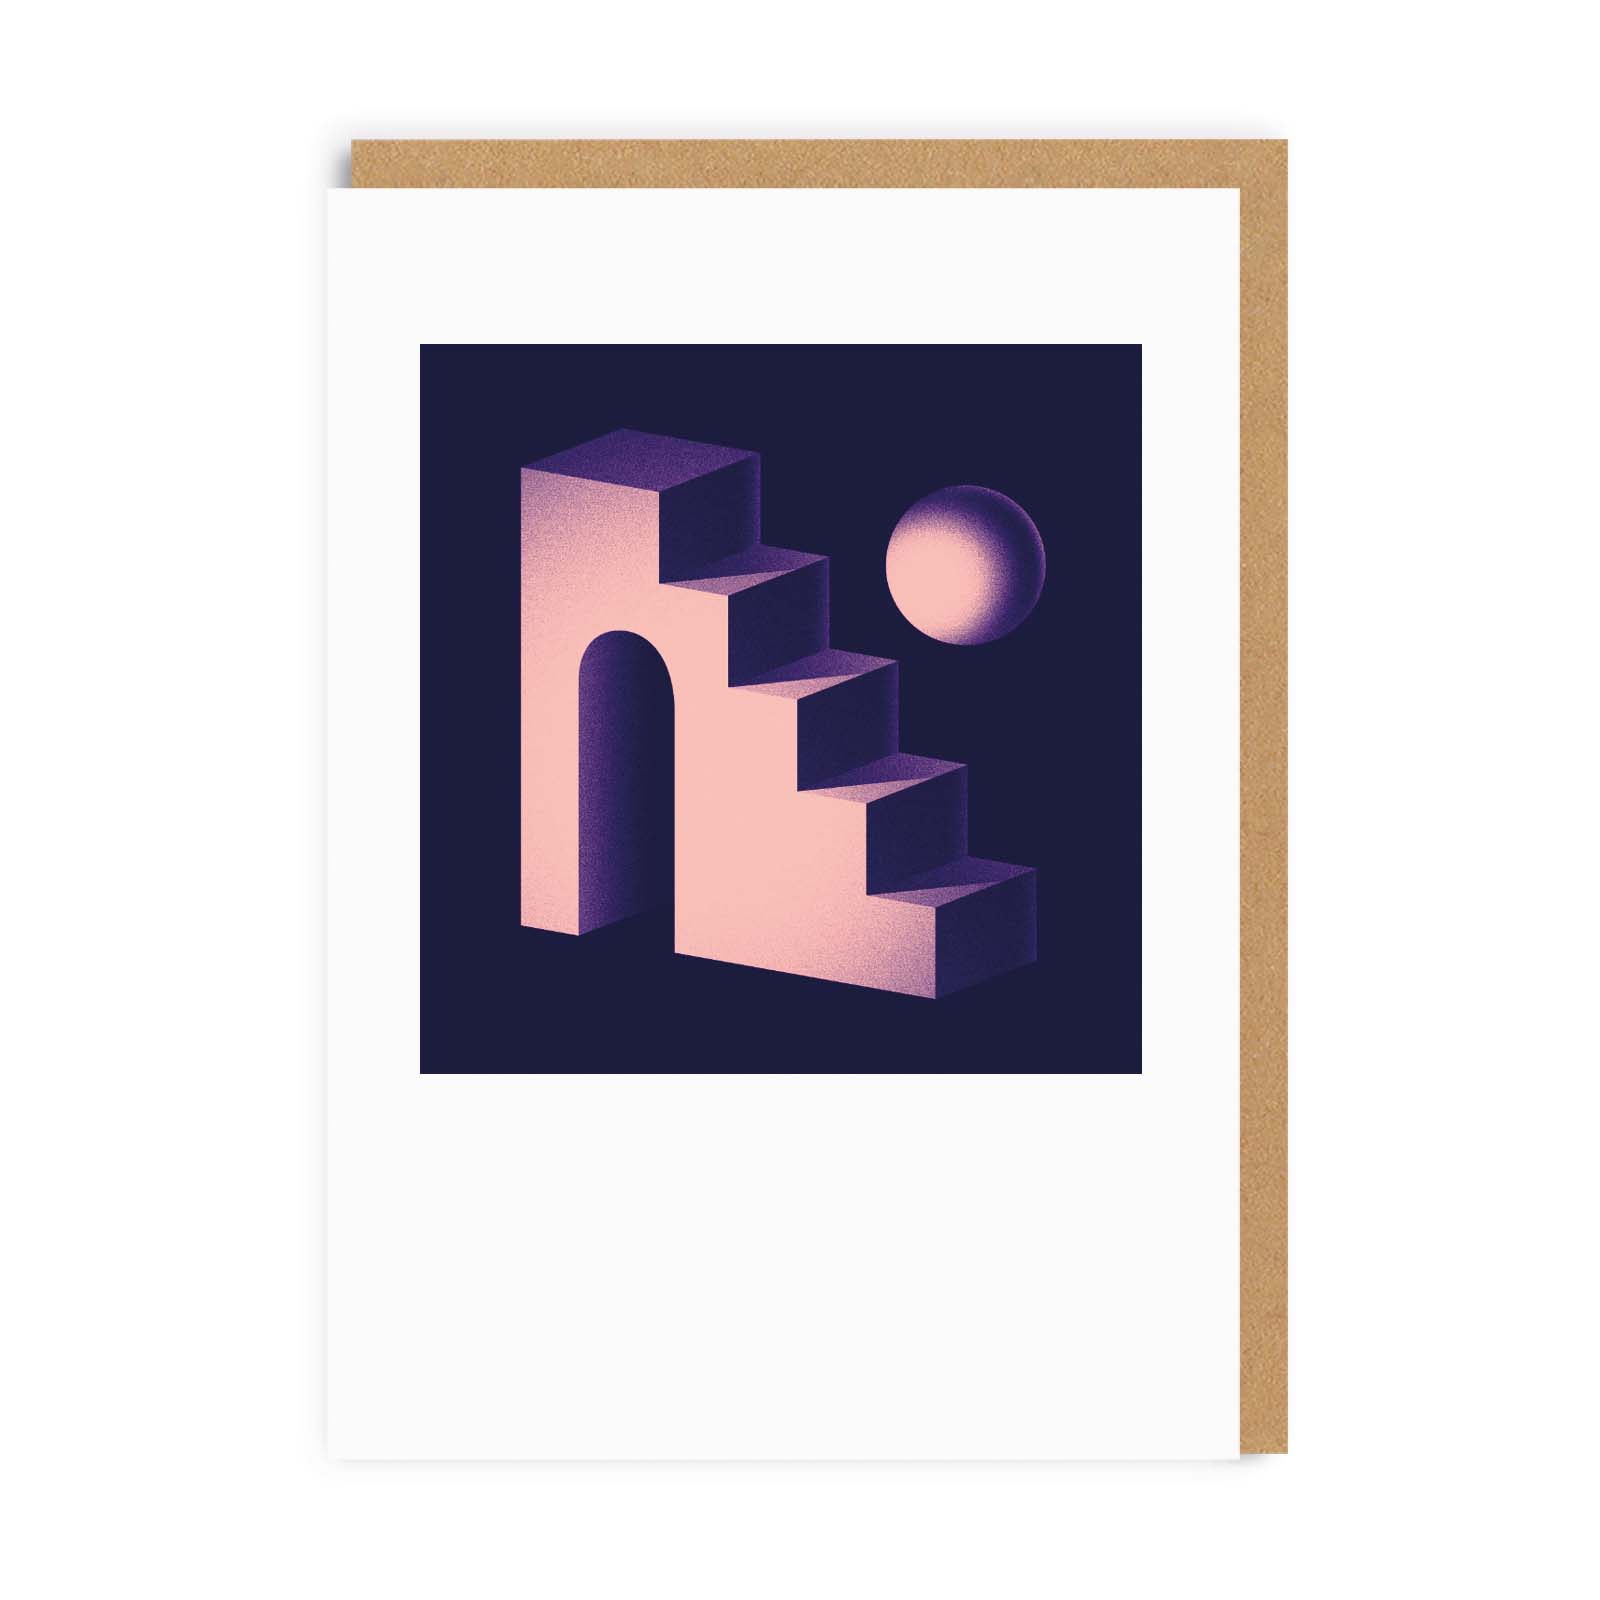 Greeting card with abstract shape design from Alec Tear